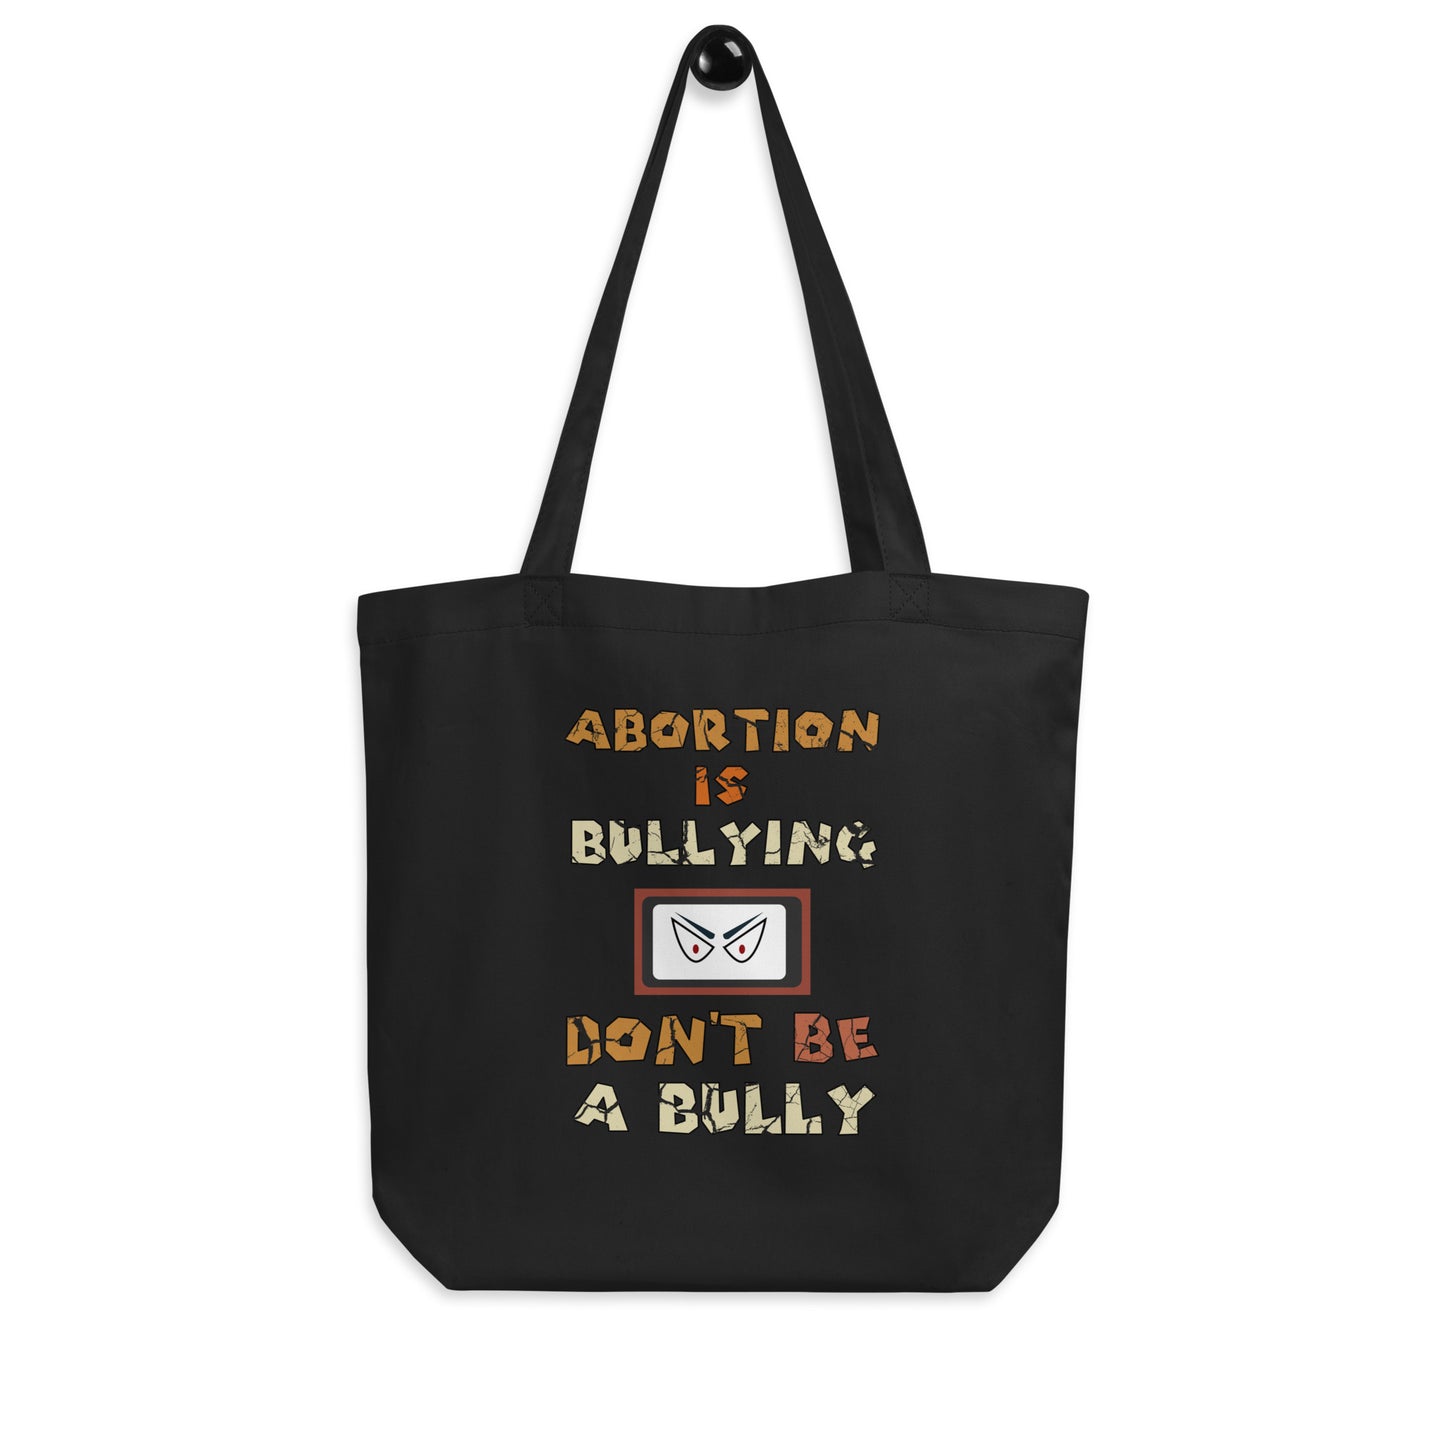 A001 Tote – Eco Tote Bag Featuring Sinister Eyes Graphic with text “Abortion is Bullying. Don’t be a Bully.”